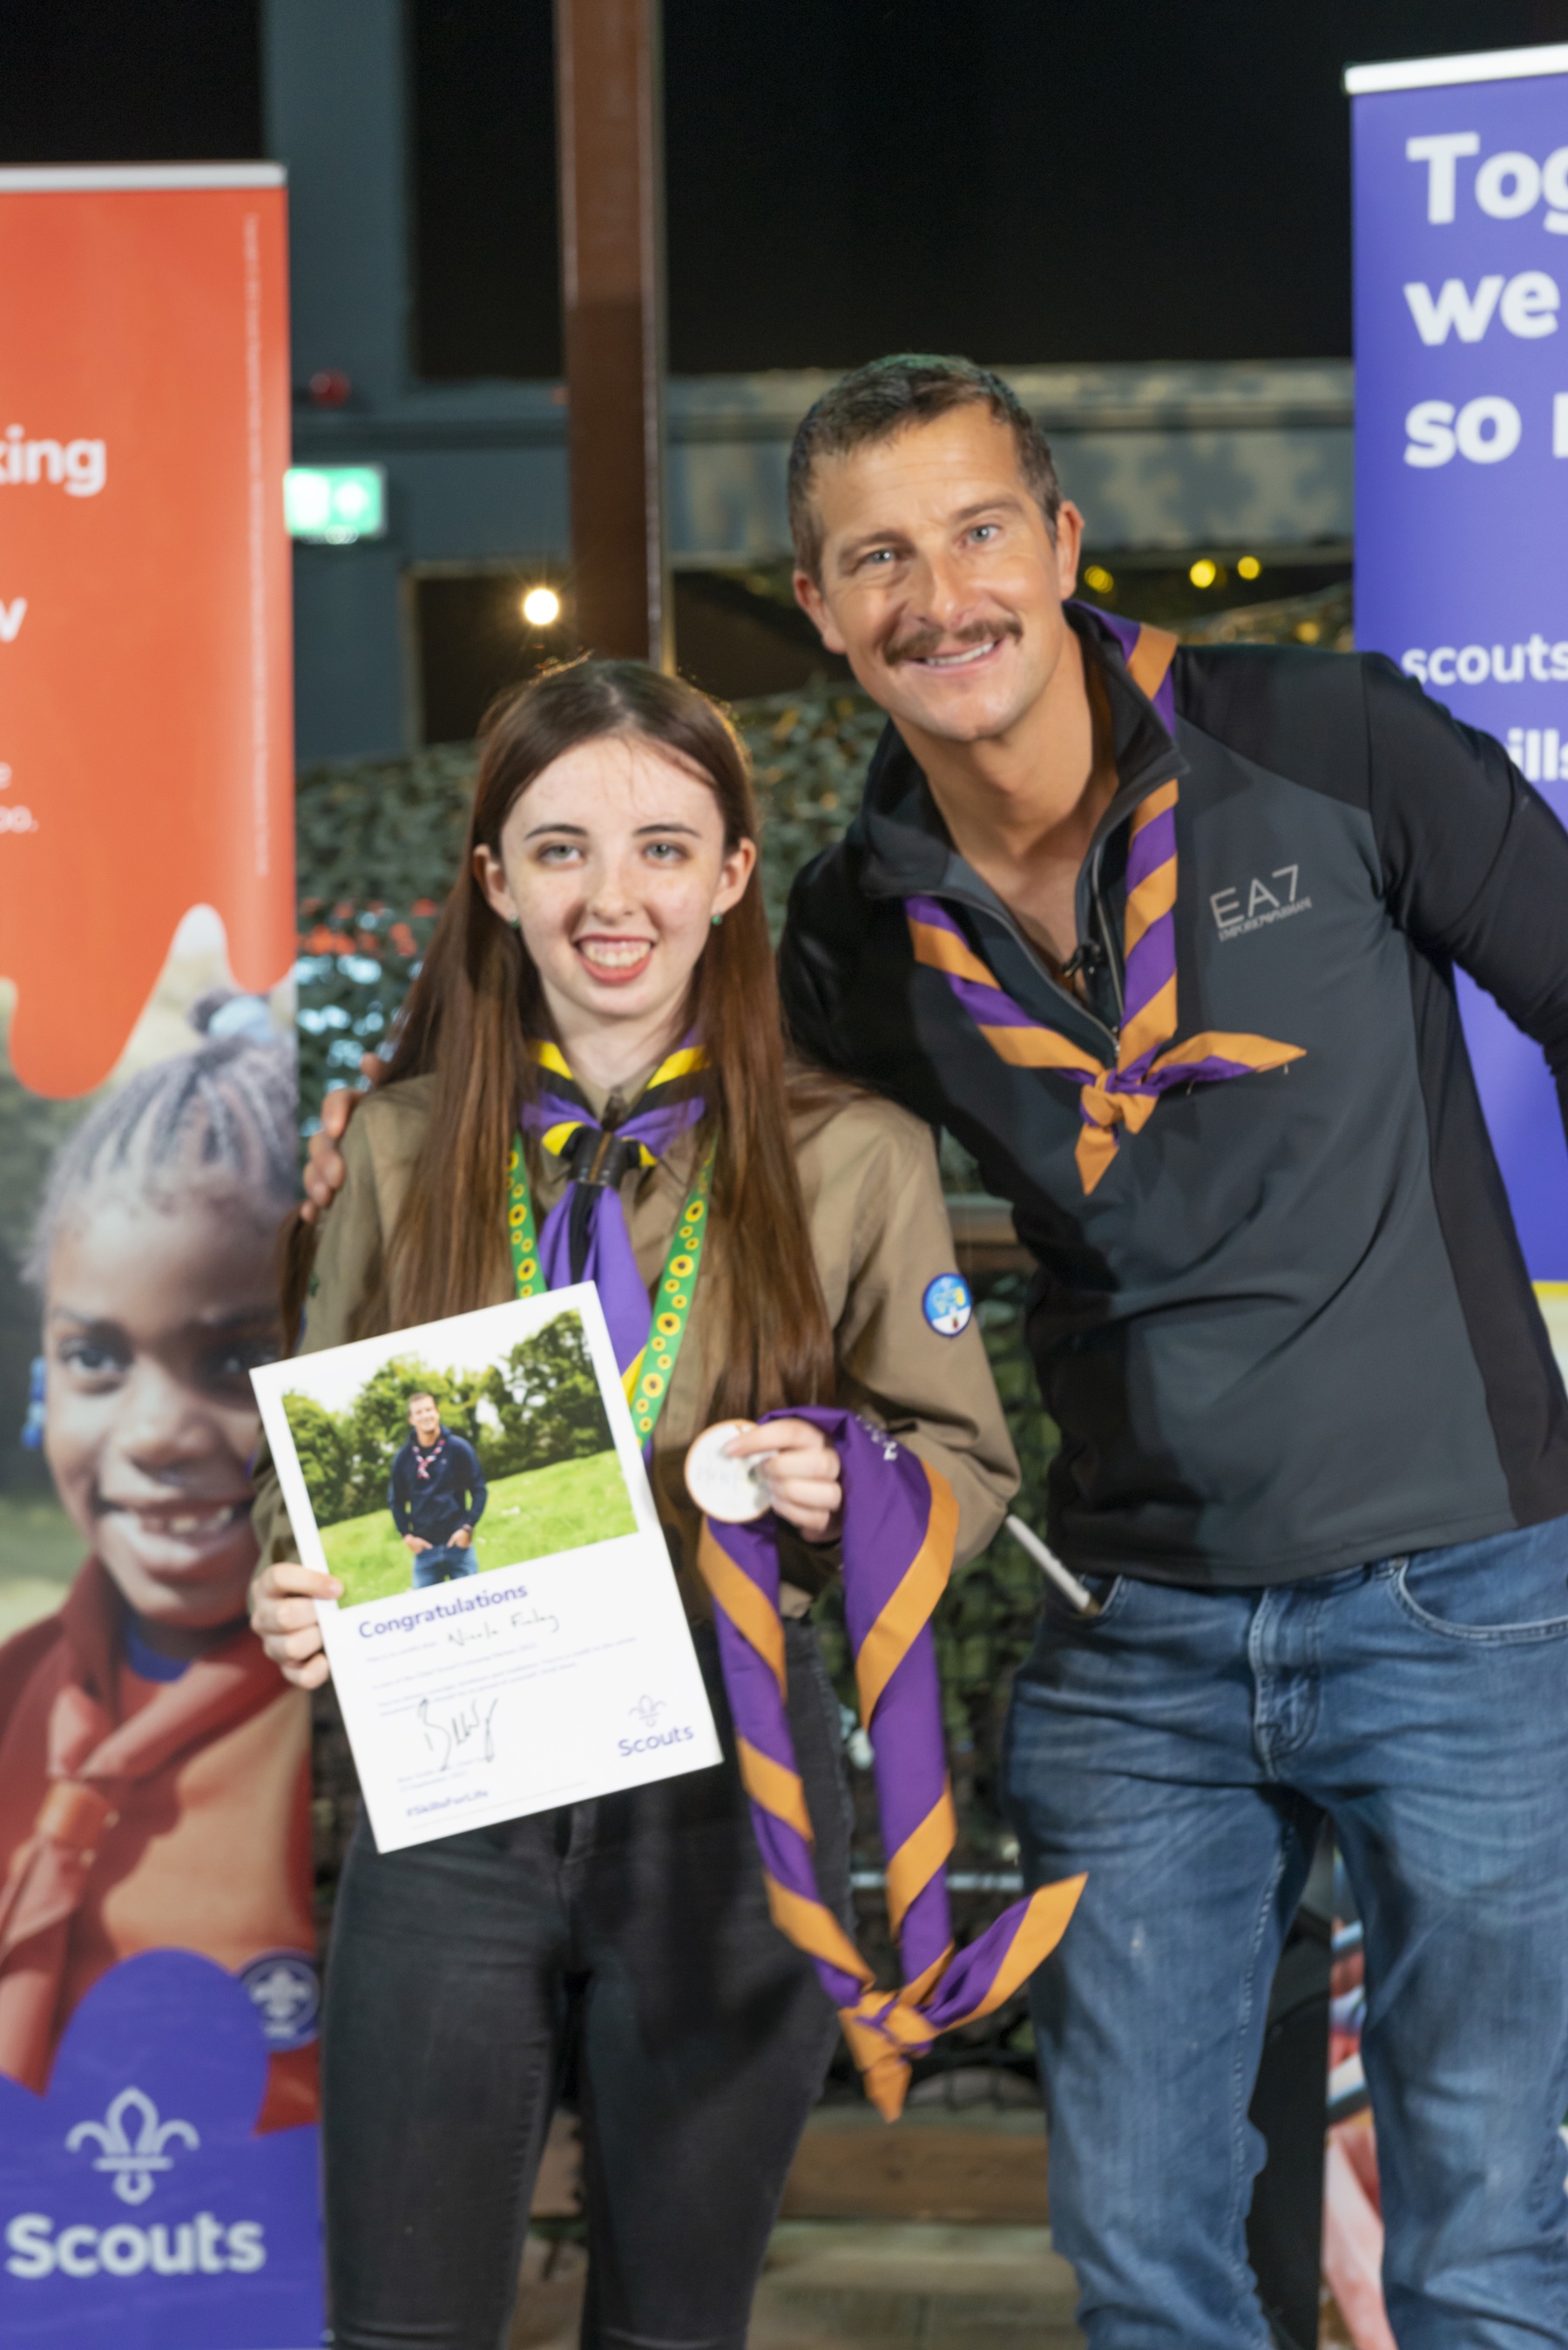 Nicole is holding her Unsung Heroes certificate standing next to Chief Scout Bear Grylls. They're both wearing neckers and smiling at the camera.